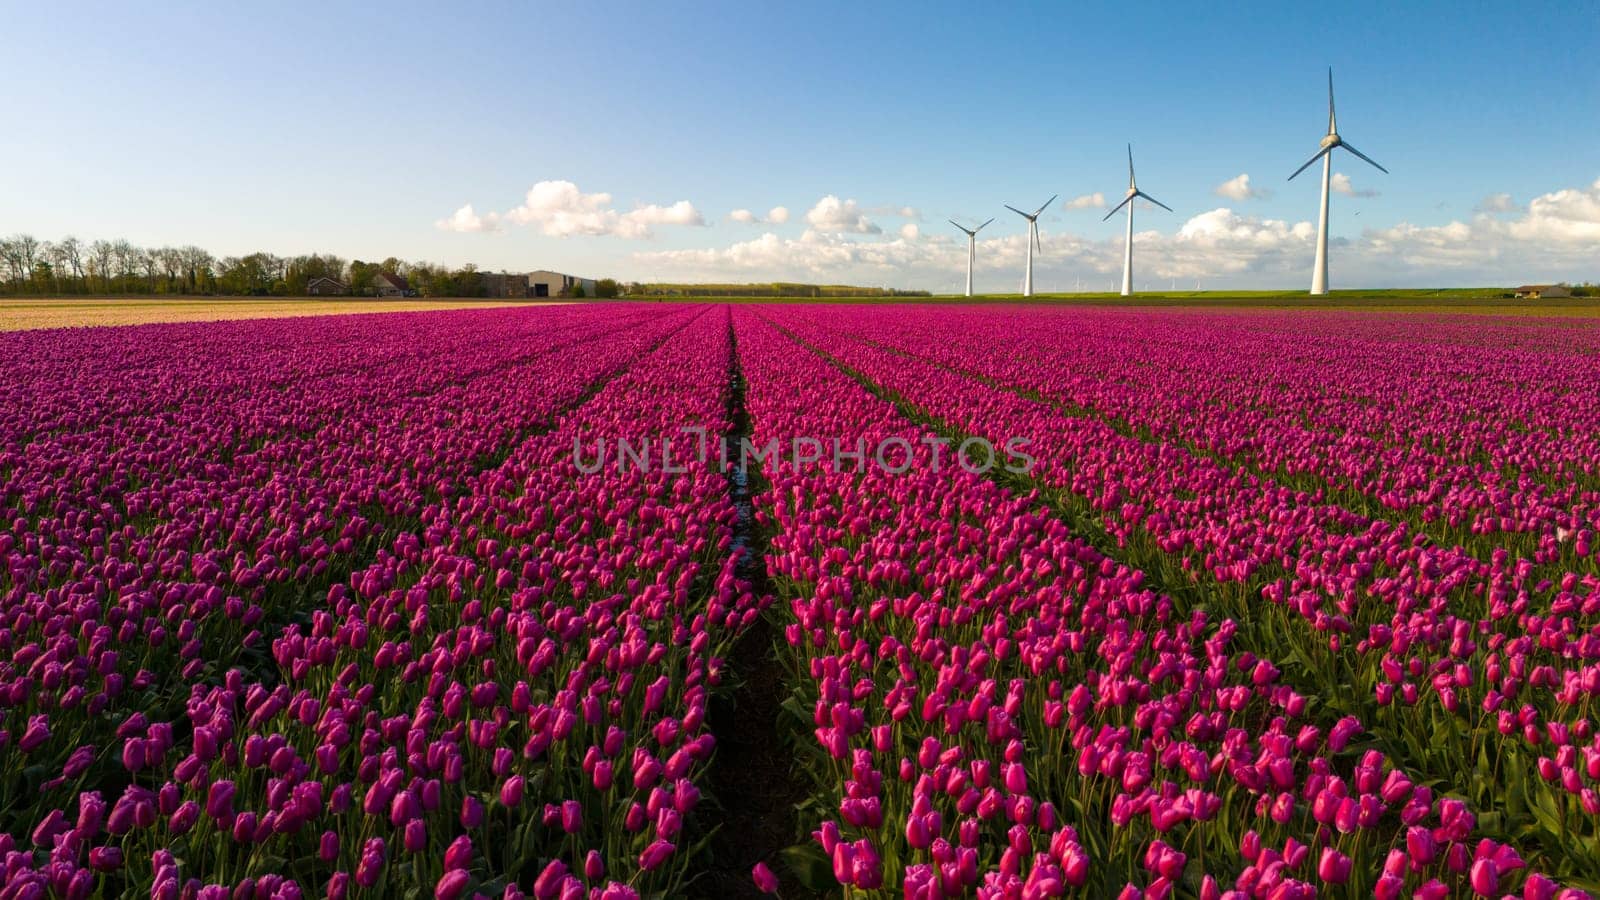 A vibrant field of colorful flowers dances gracefully in the wind, with majestic windmills standing tall in the background under a clear blue sky by fokkebok